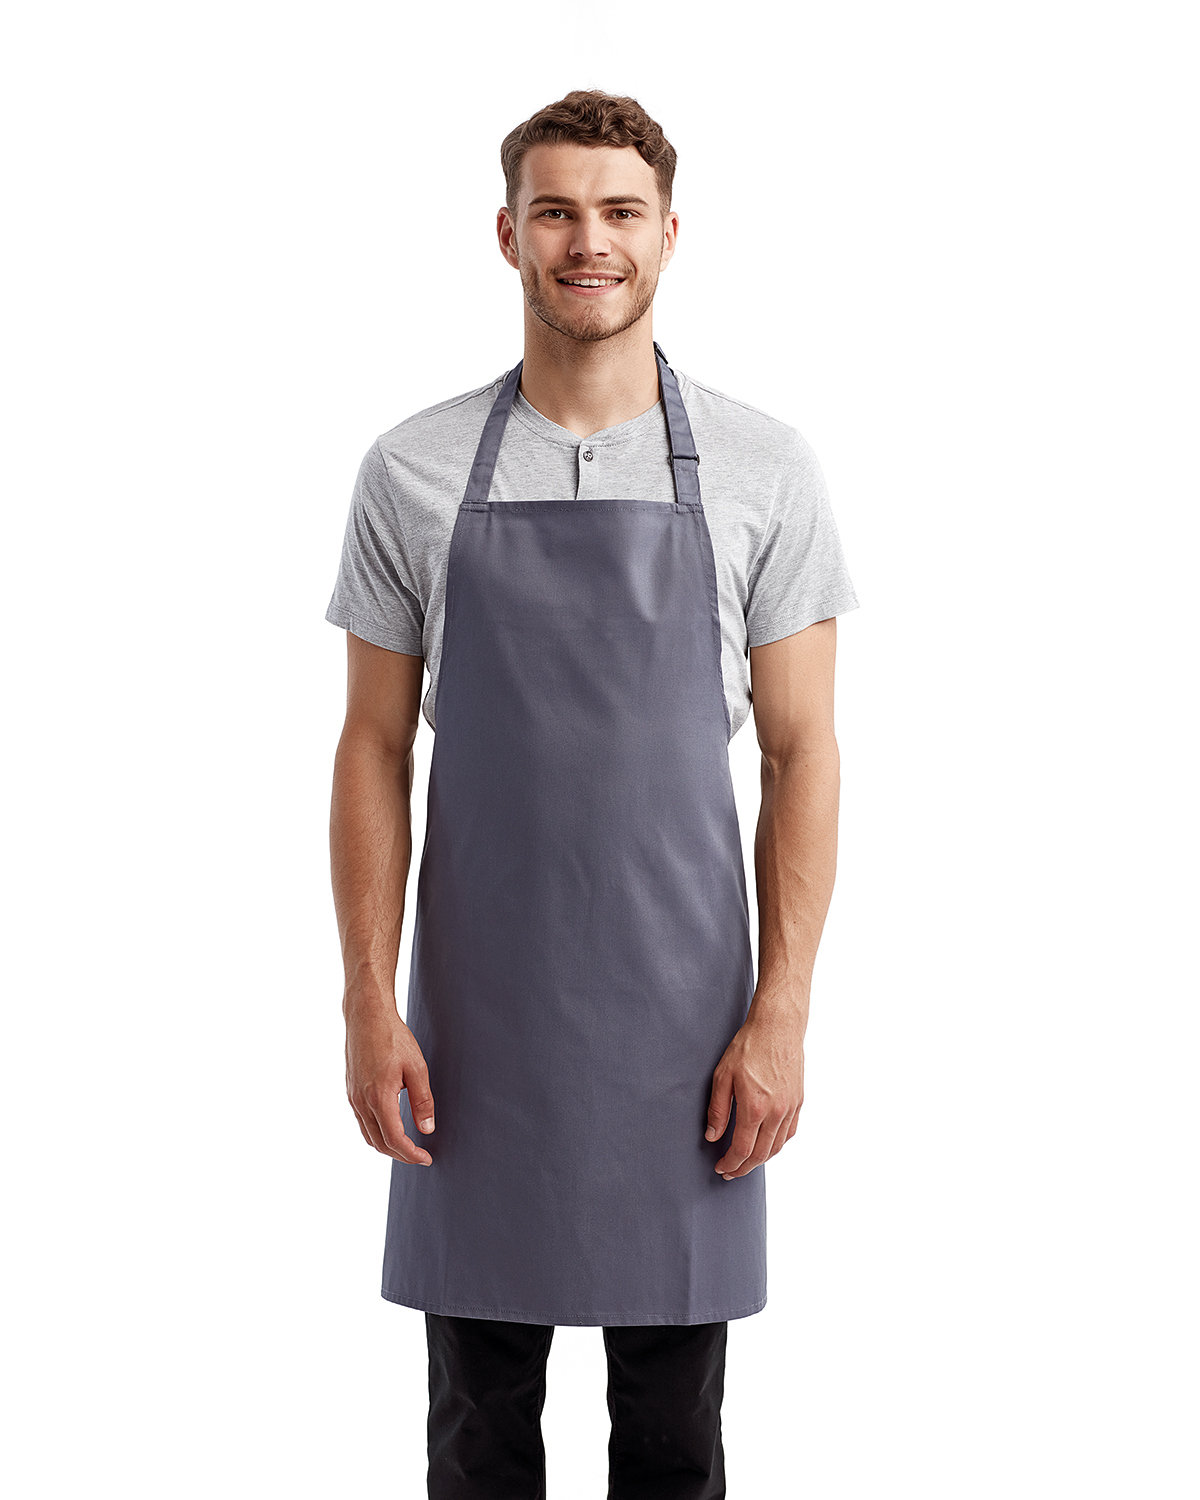 Artisan Collection by Reprime "Colours" Sustainable Bib Apron STEEL 